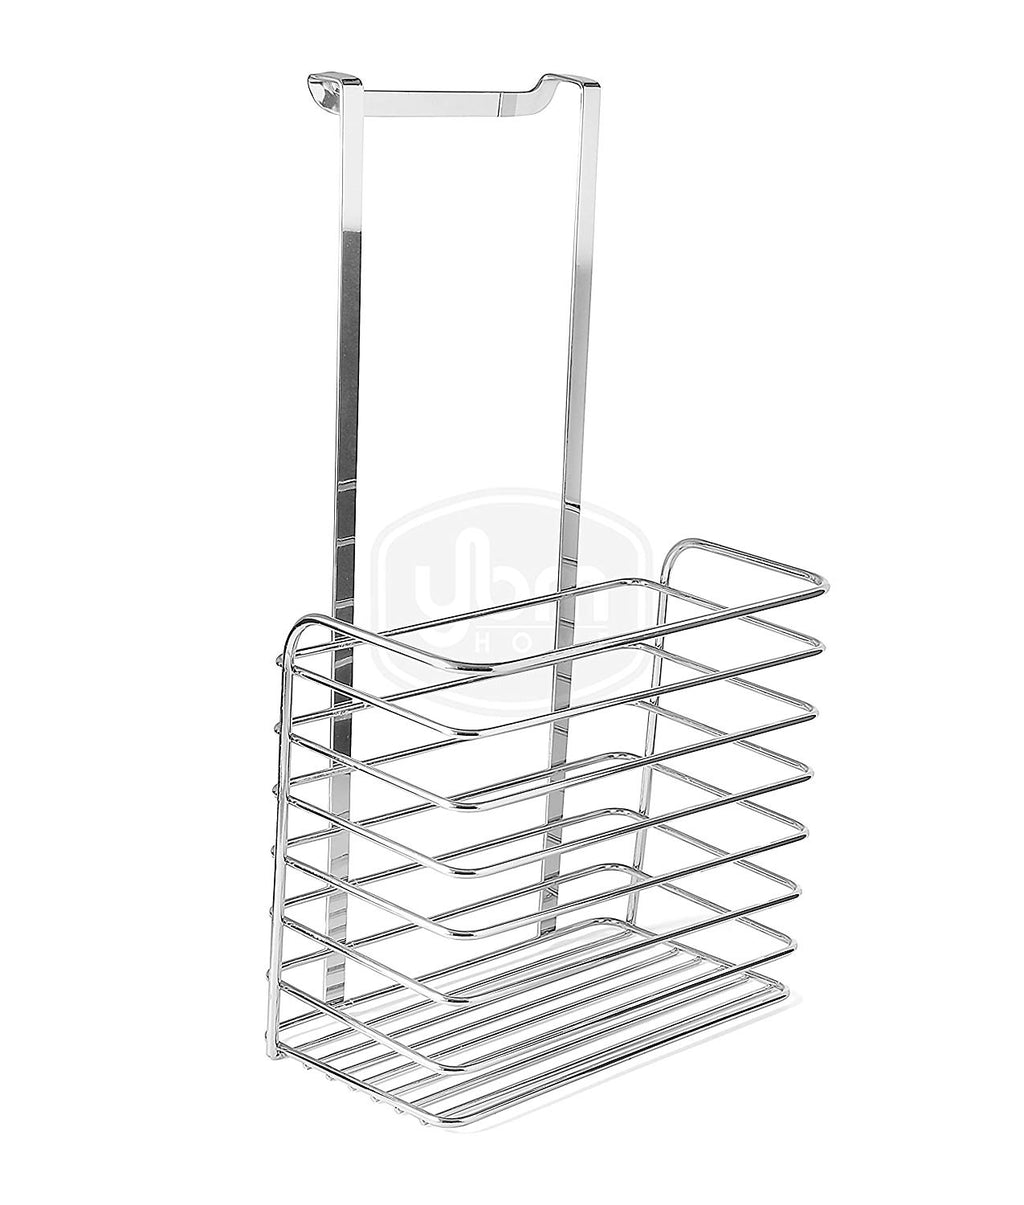 YBM HOME Ybmhome Over The Door Storage Basket, Kitchen Cabinet, Bathroom Shower Organization for Aluminum Foil, Sandwich Bags, Cleaning Supplies Chrome 2217 (1)